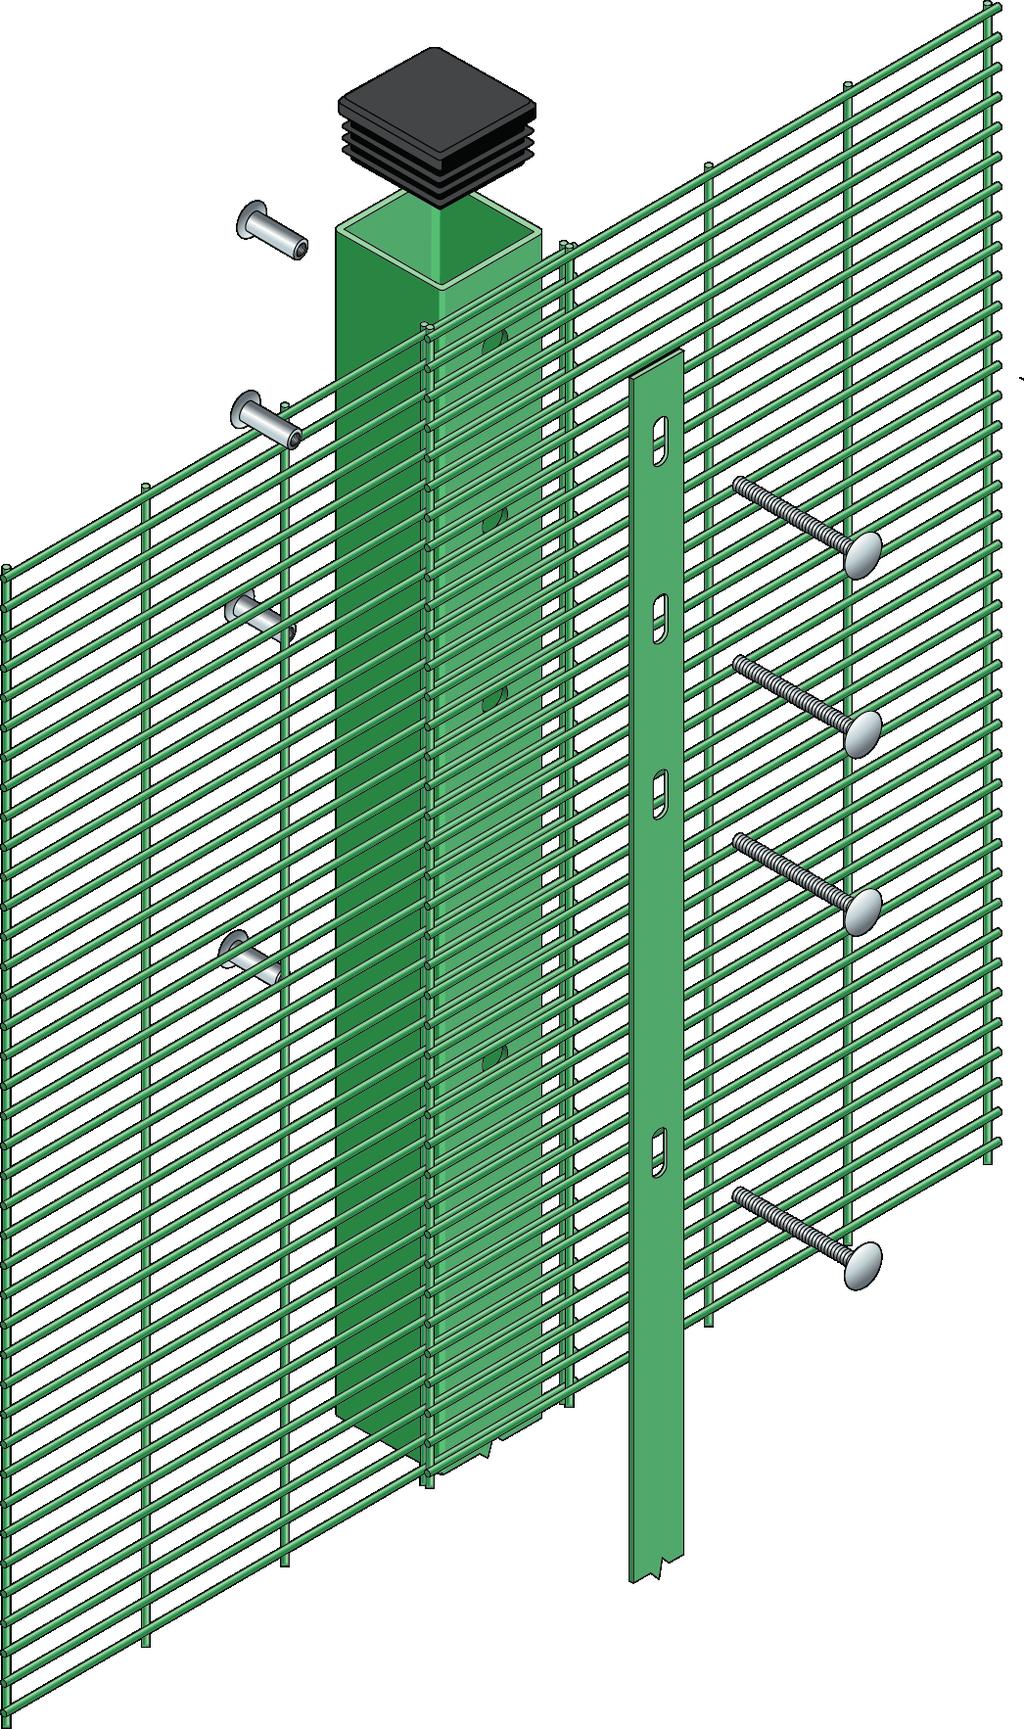 FENESFE SEURUS-LITE nti-climb close mesh Galvanised and polyester powder coated panels and posts Through bolt with rear fastening SafeTFix Overlapping panels with full length clamp bar PNEL IMENSIONS